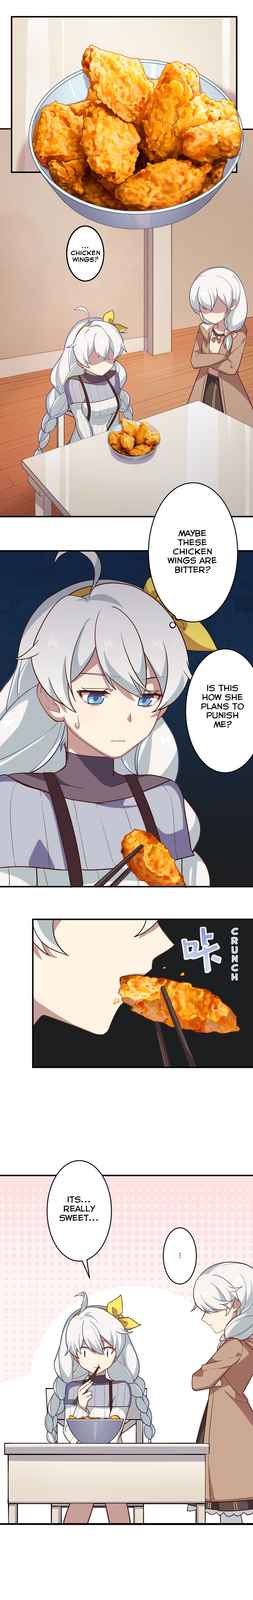 Honkai Impact 3rd Valkyries' Dining Escapades Ch. 6 The Overly Sweet Mashed Potato Stuffed Chicken Wings